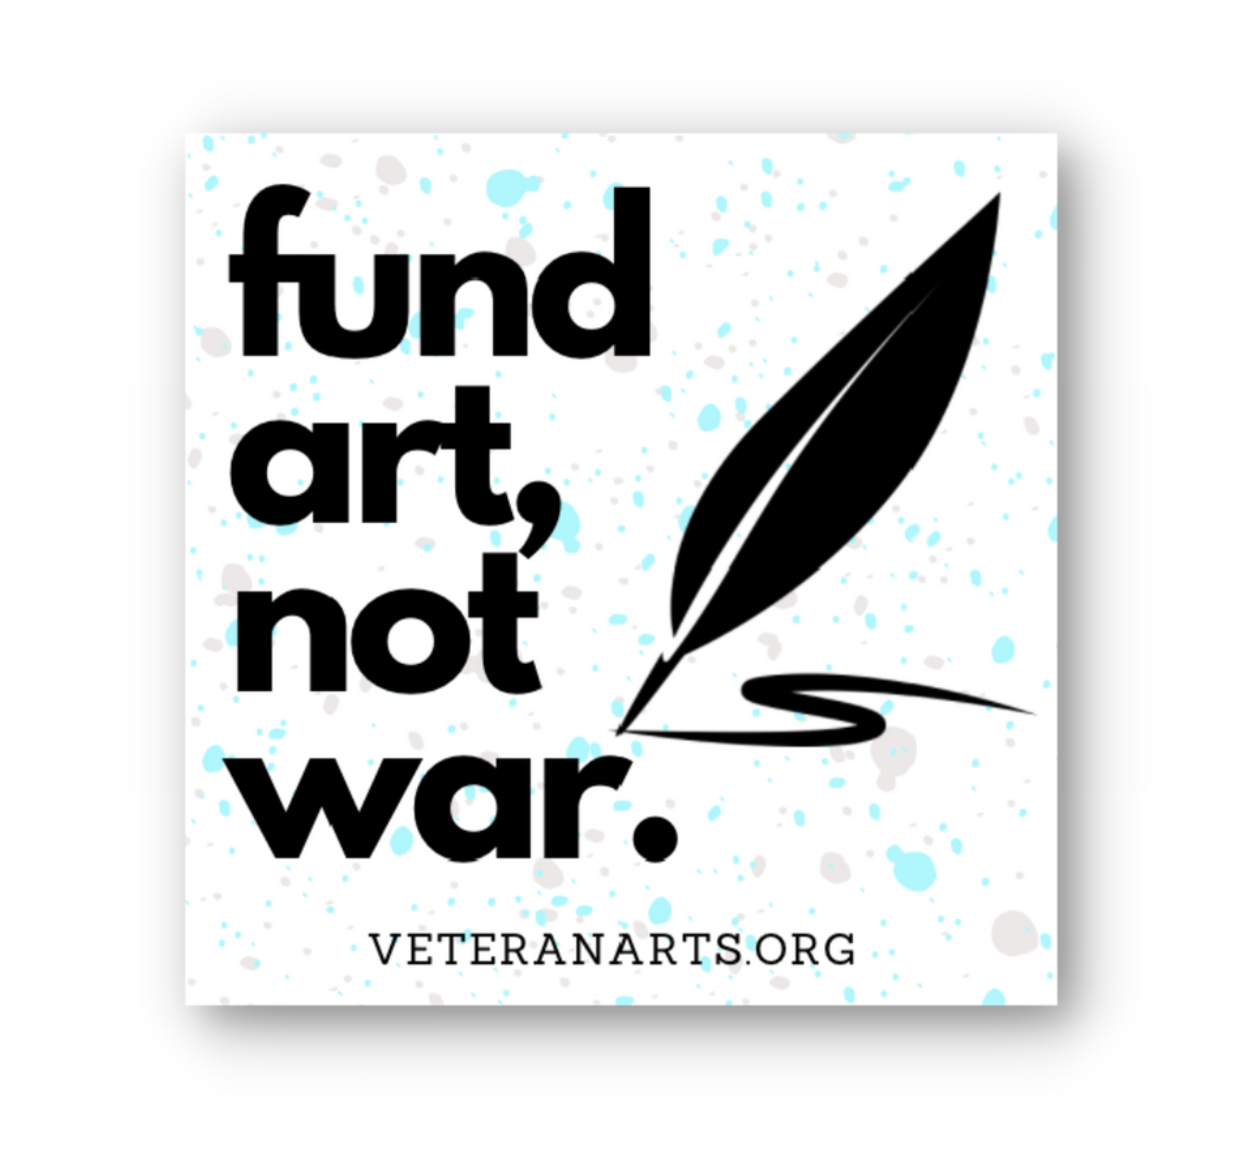 Donations of $50 or more receive our sticker with the message fund art, not war